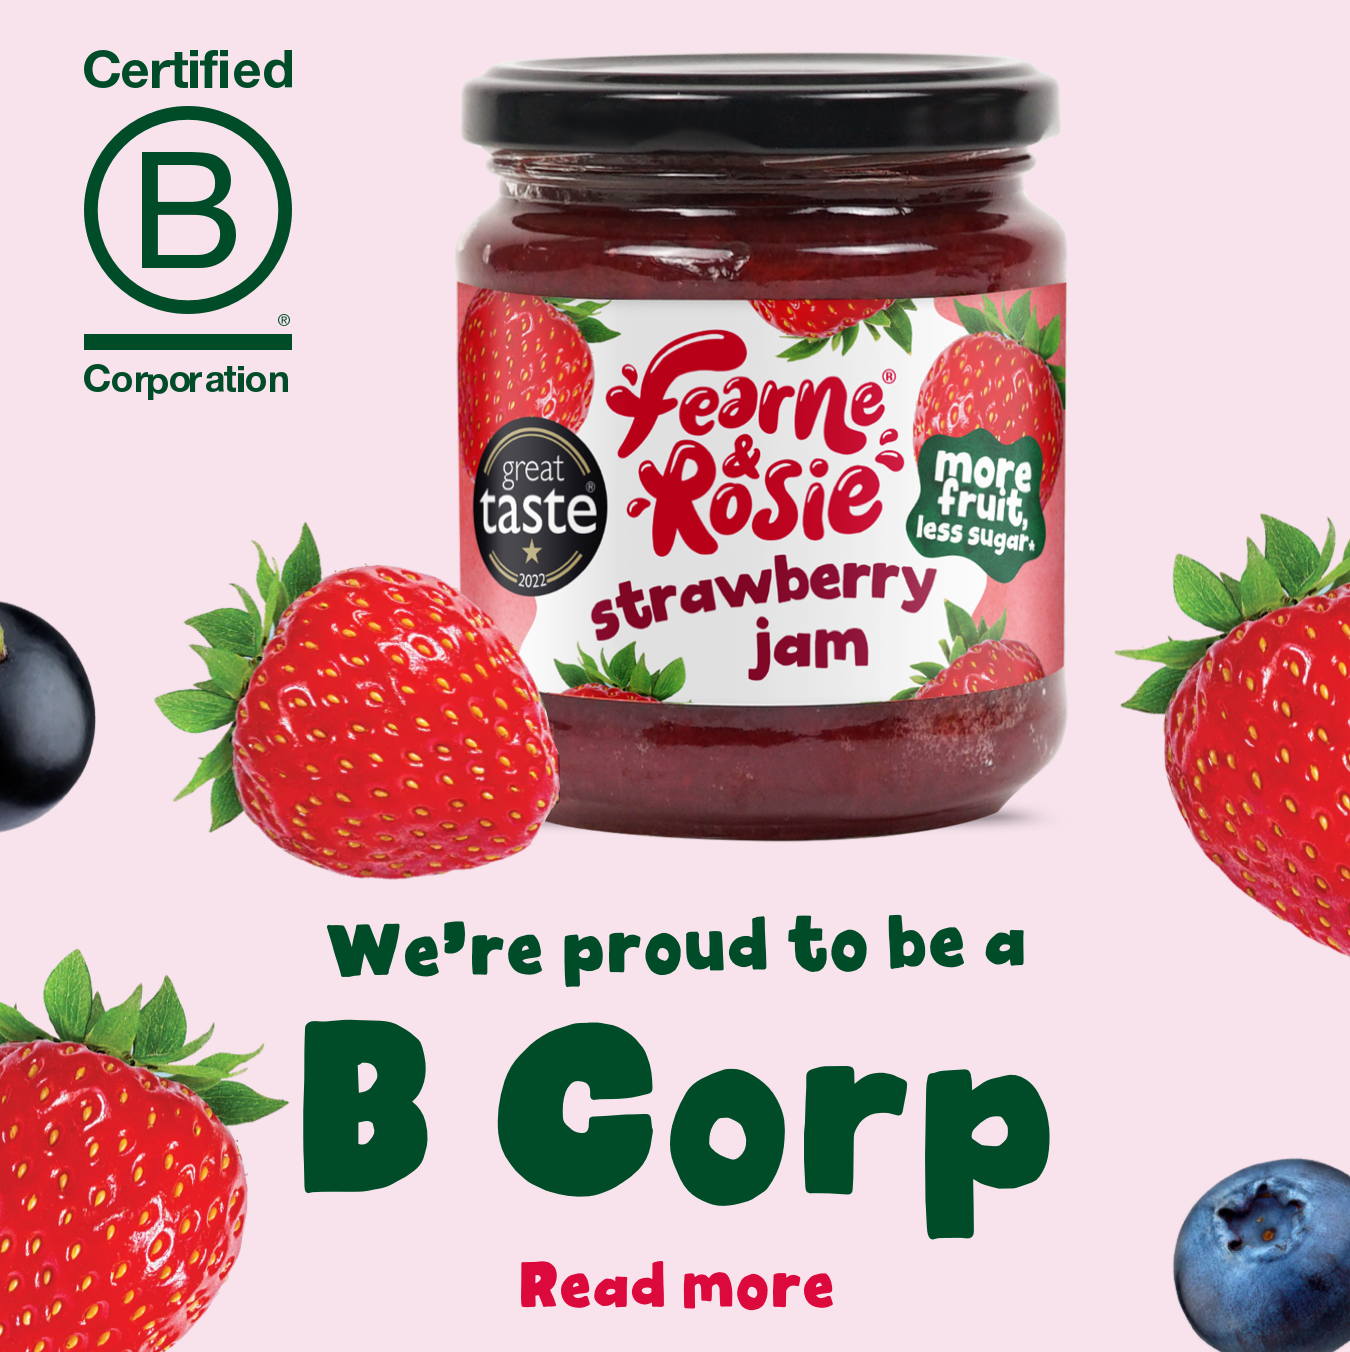 We're proud to be a B Corp - Read more by clicking here